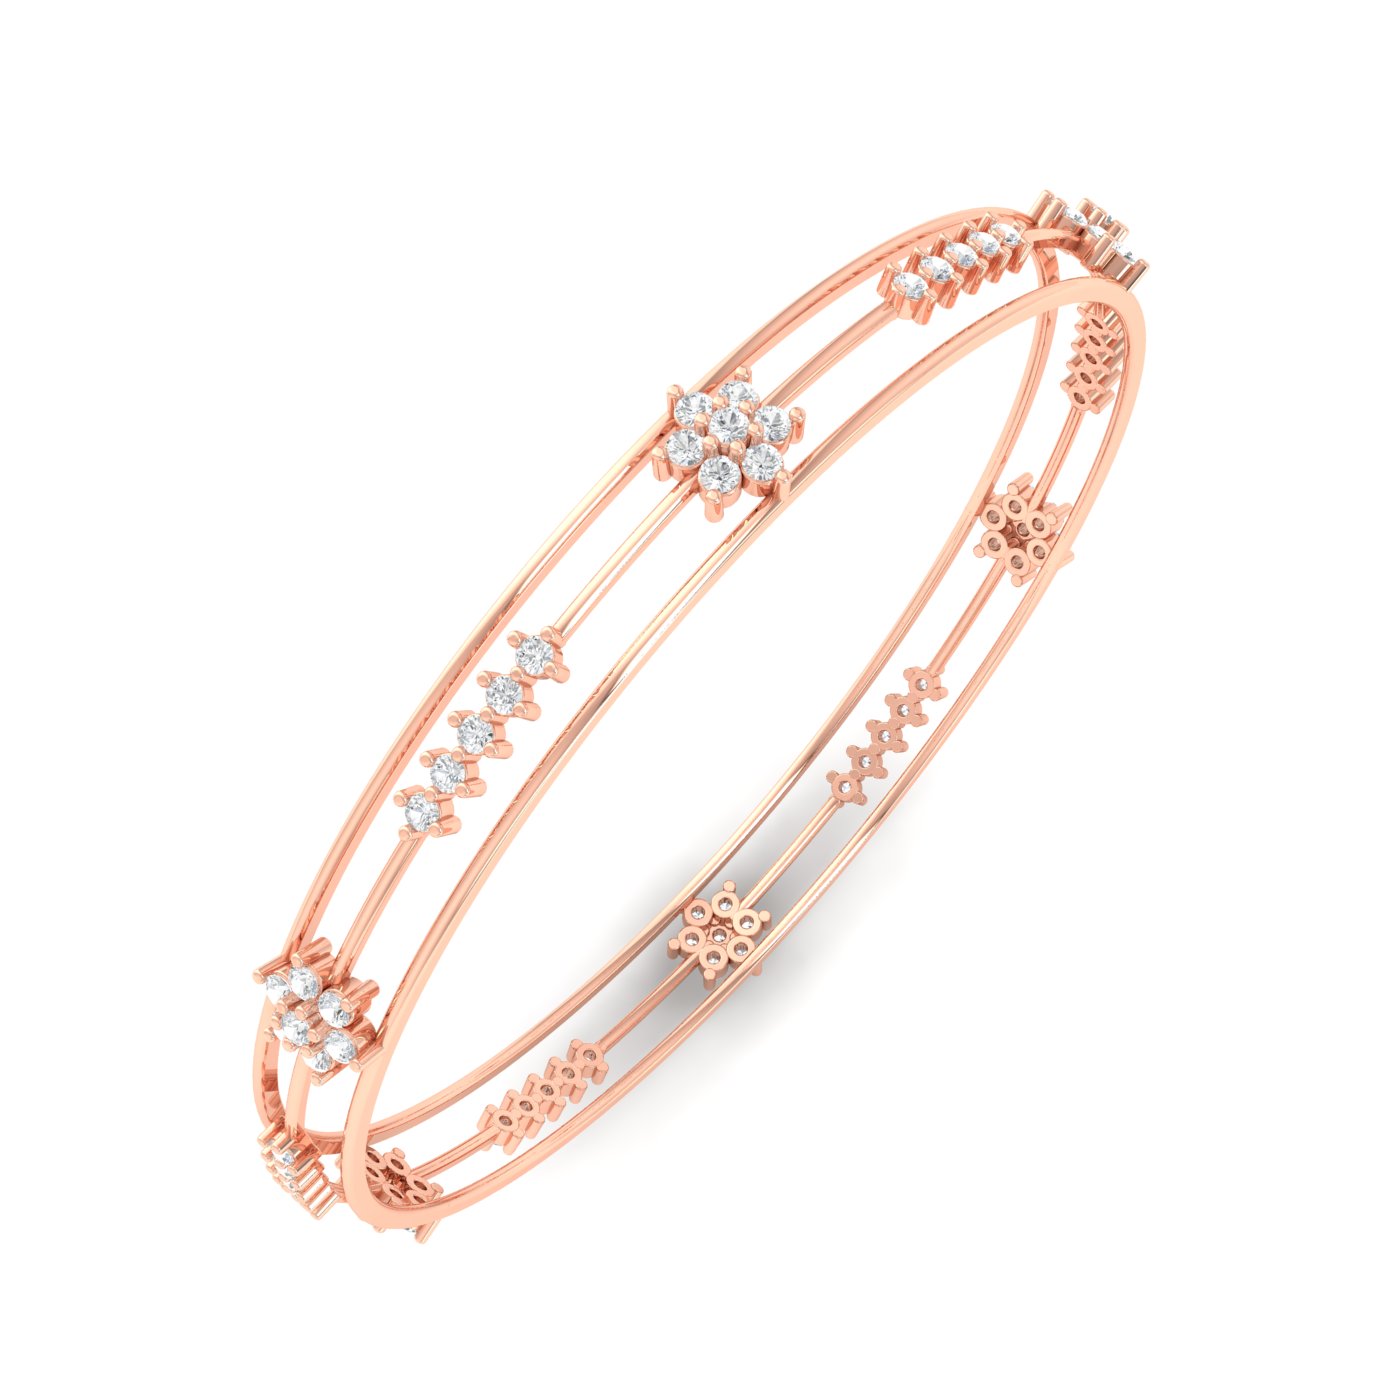 Show Your Love with New Year Gifts for Your Parents || Nora Glamorous Diamond bangles ||